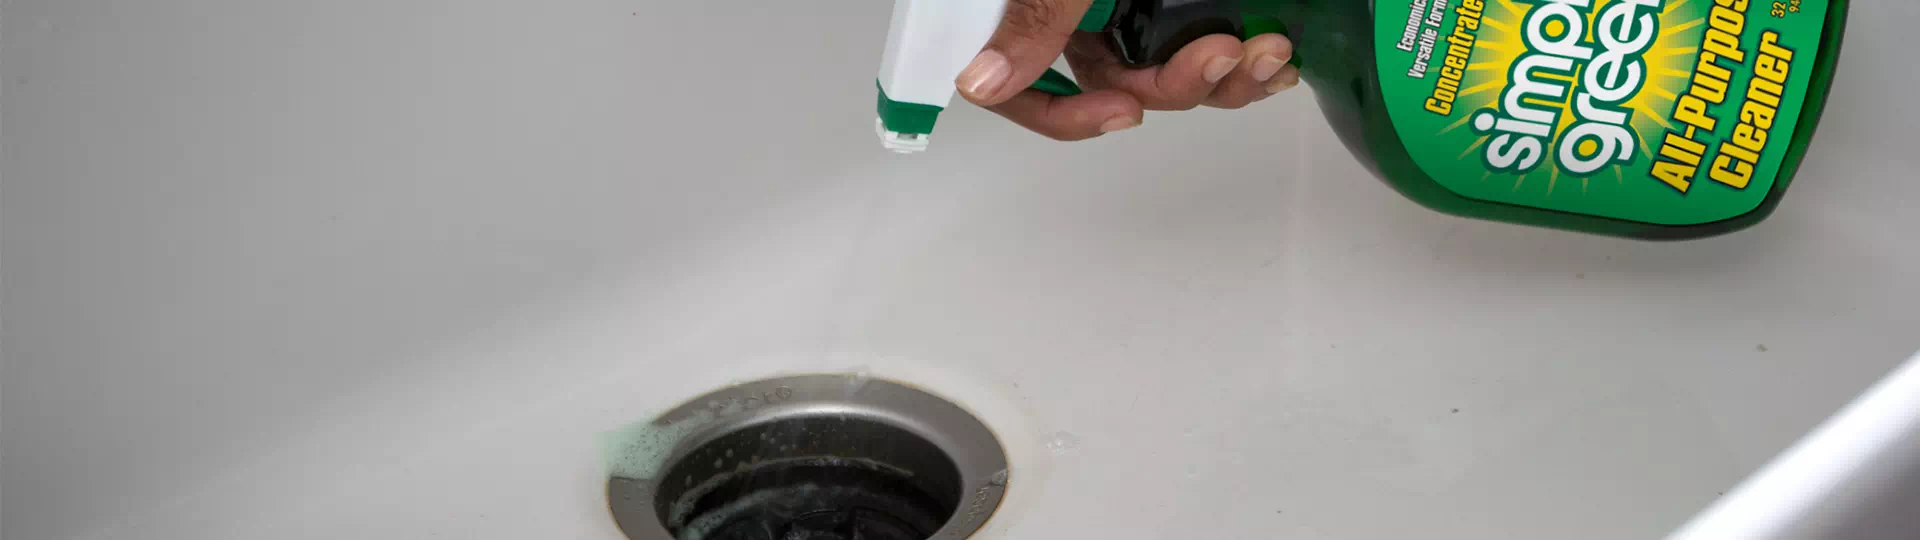 How To Clean Kitchen Sink Drain Simple Green